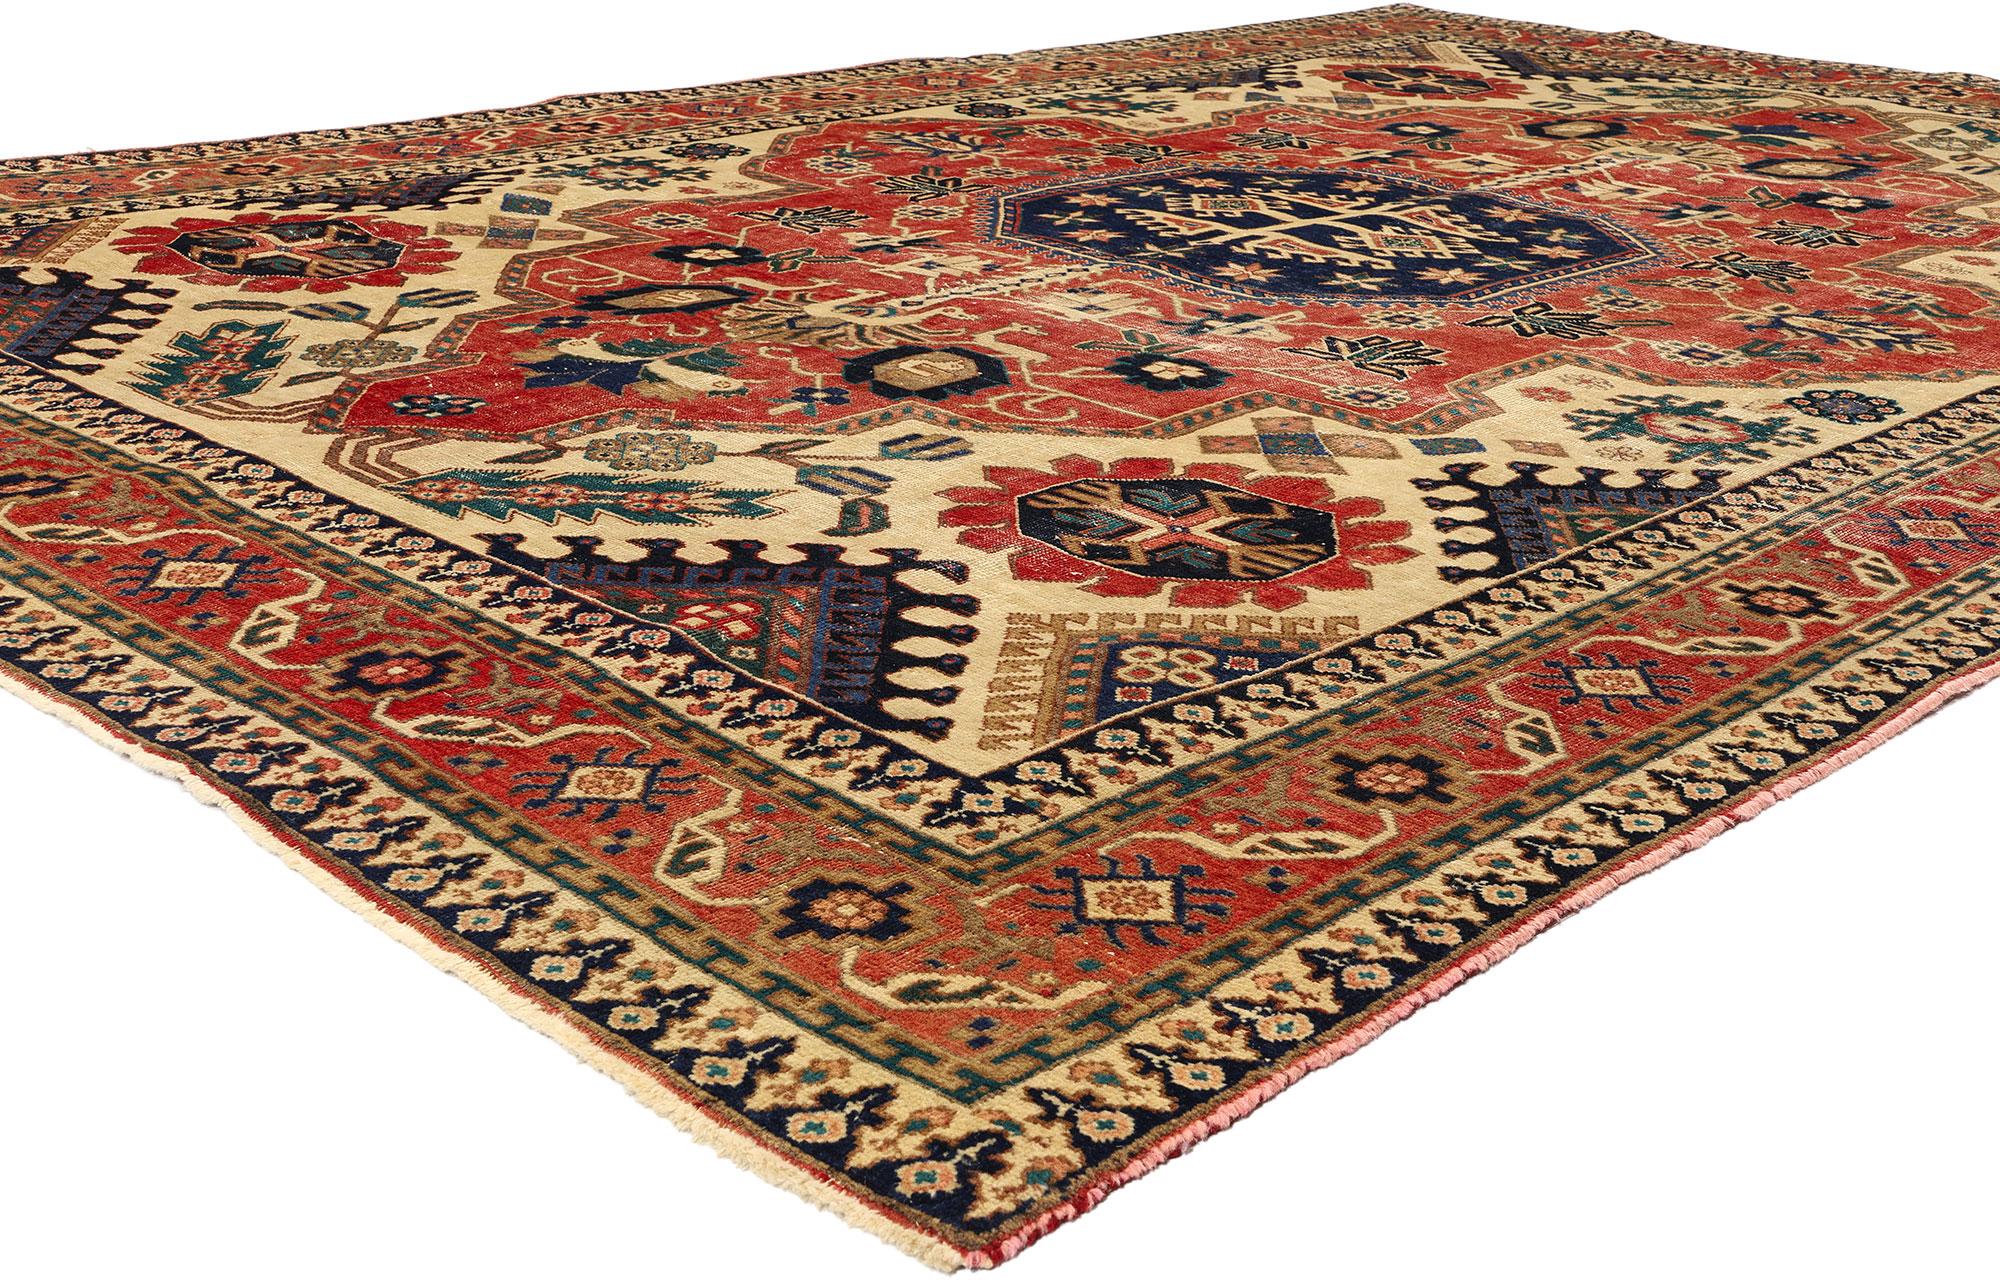 78714 Vintage Persian Ardabil Rug, 07'01 x 10'04. Persian Ardabil rugs, originating from the city of Ardabil in Iran, are renowned for their intricate designs, fine craftsmanship, and high quality. These handmade carpets feature elaborate geometric